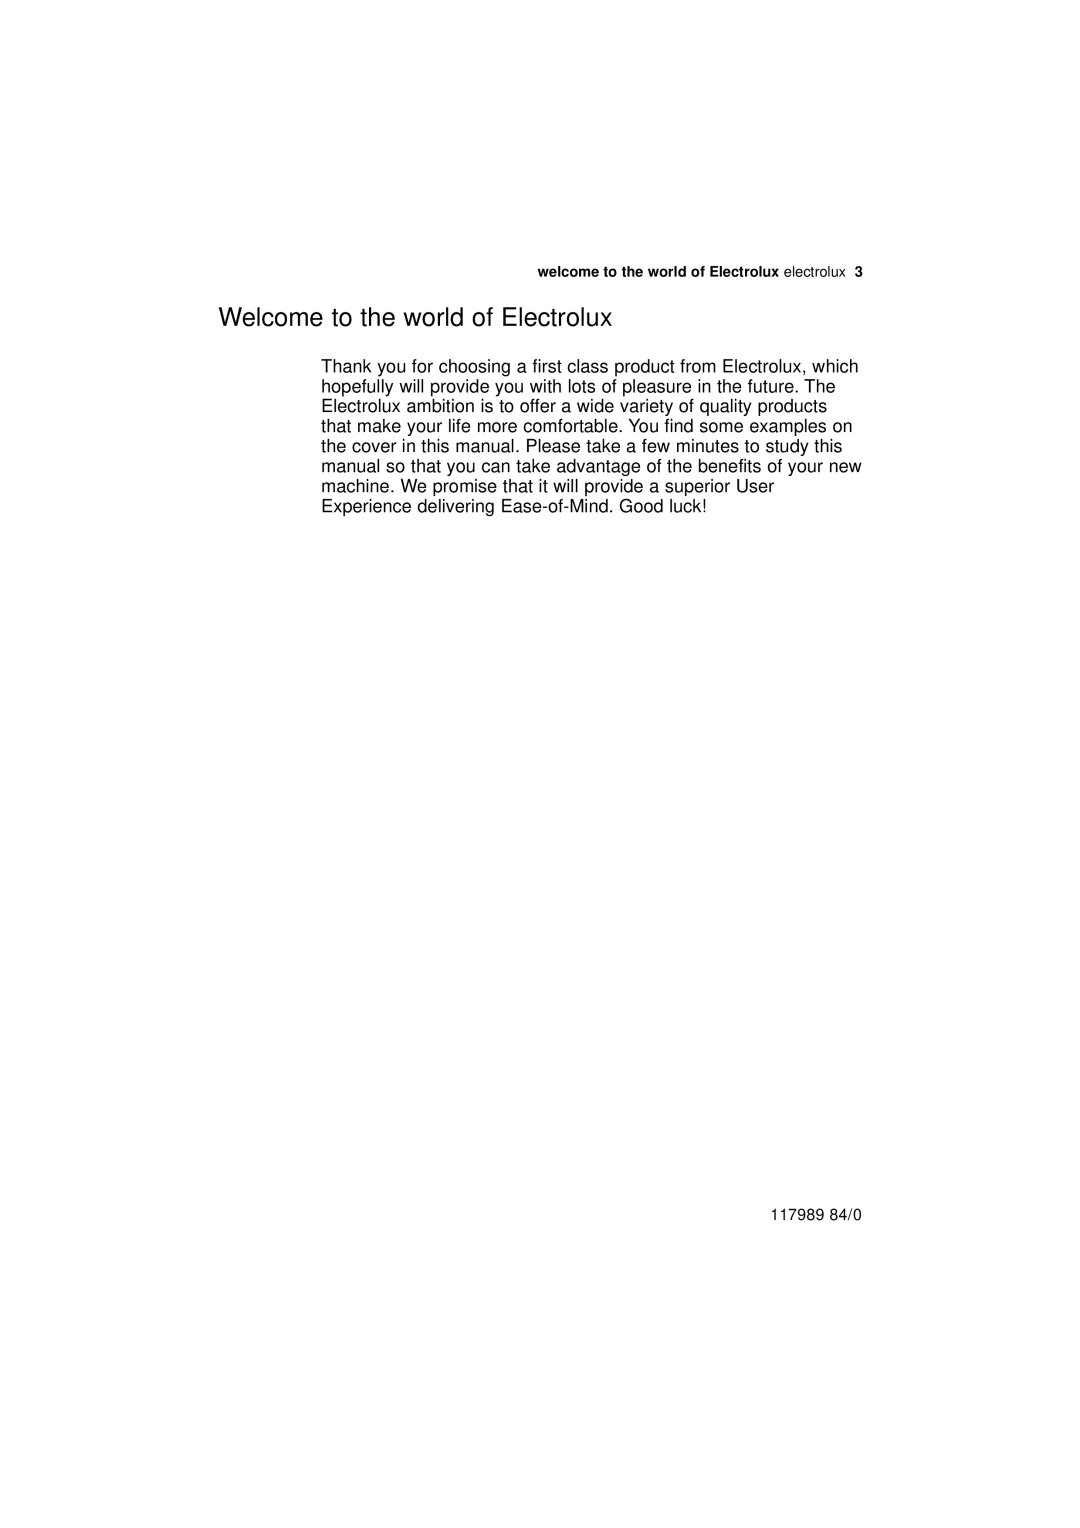 Electrolux ESI 63010 user manual Welcome to the world of Electrolux, 117989 84/0 